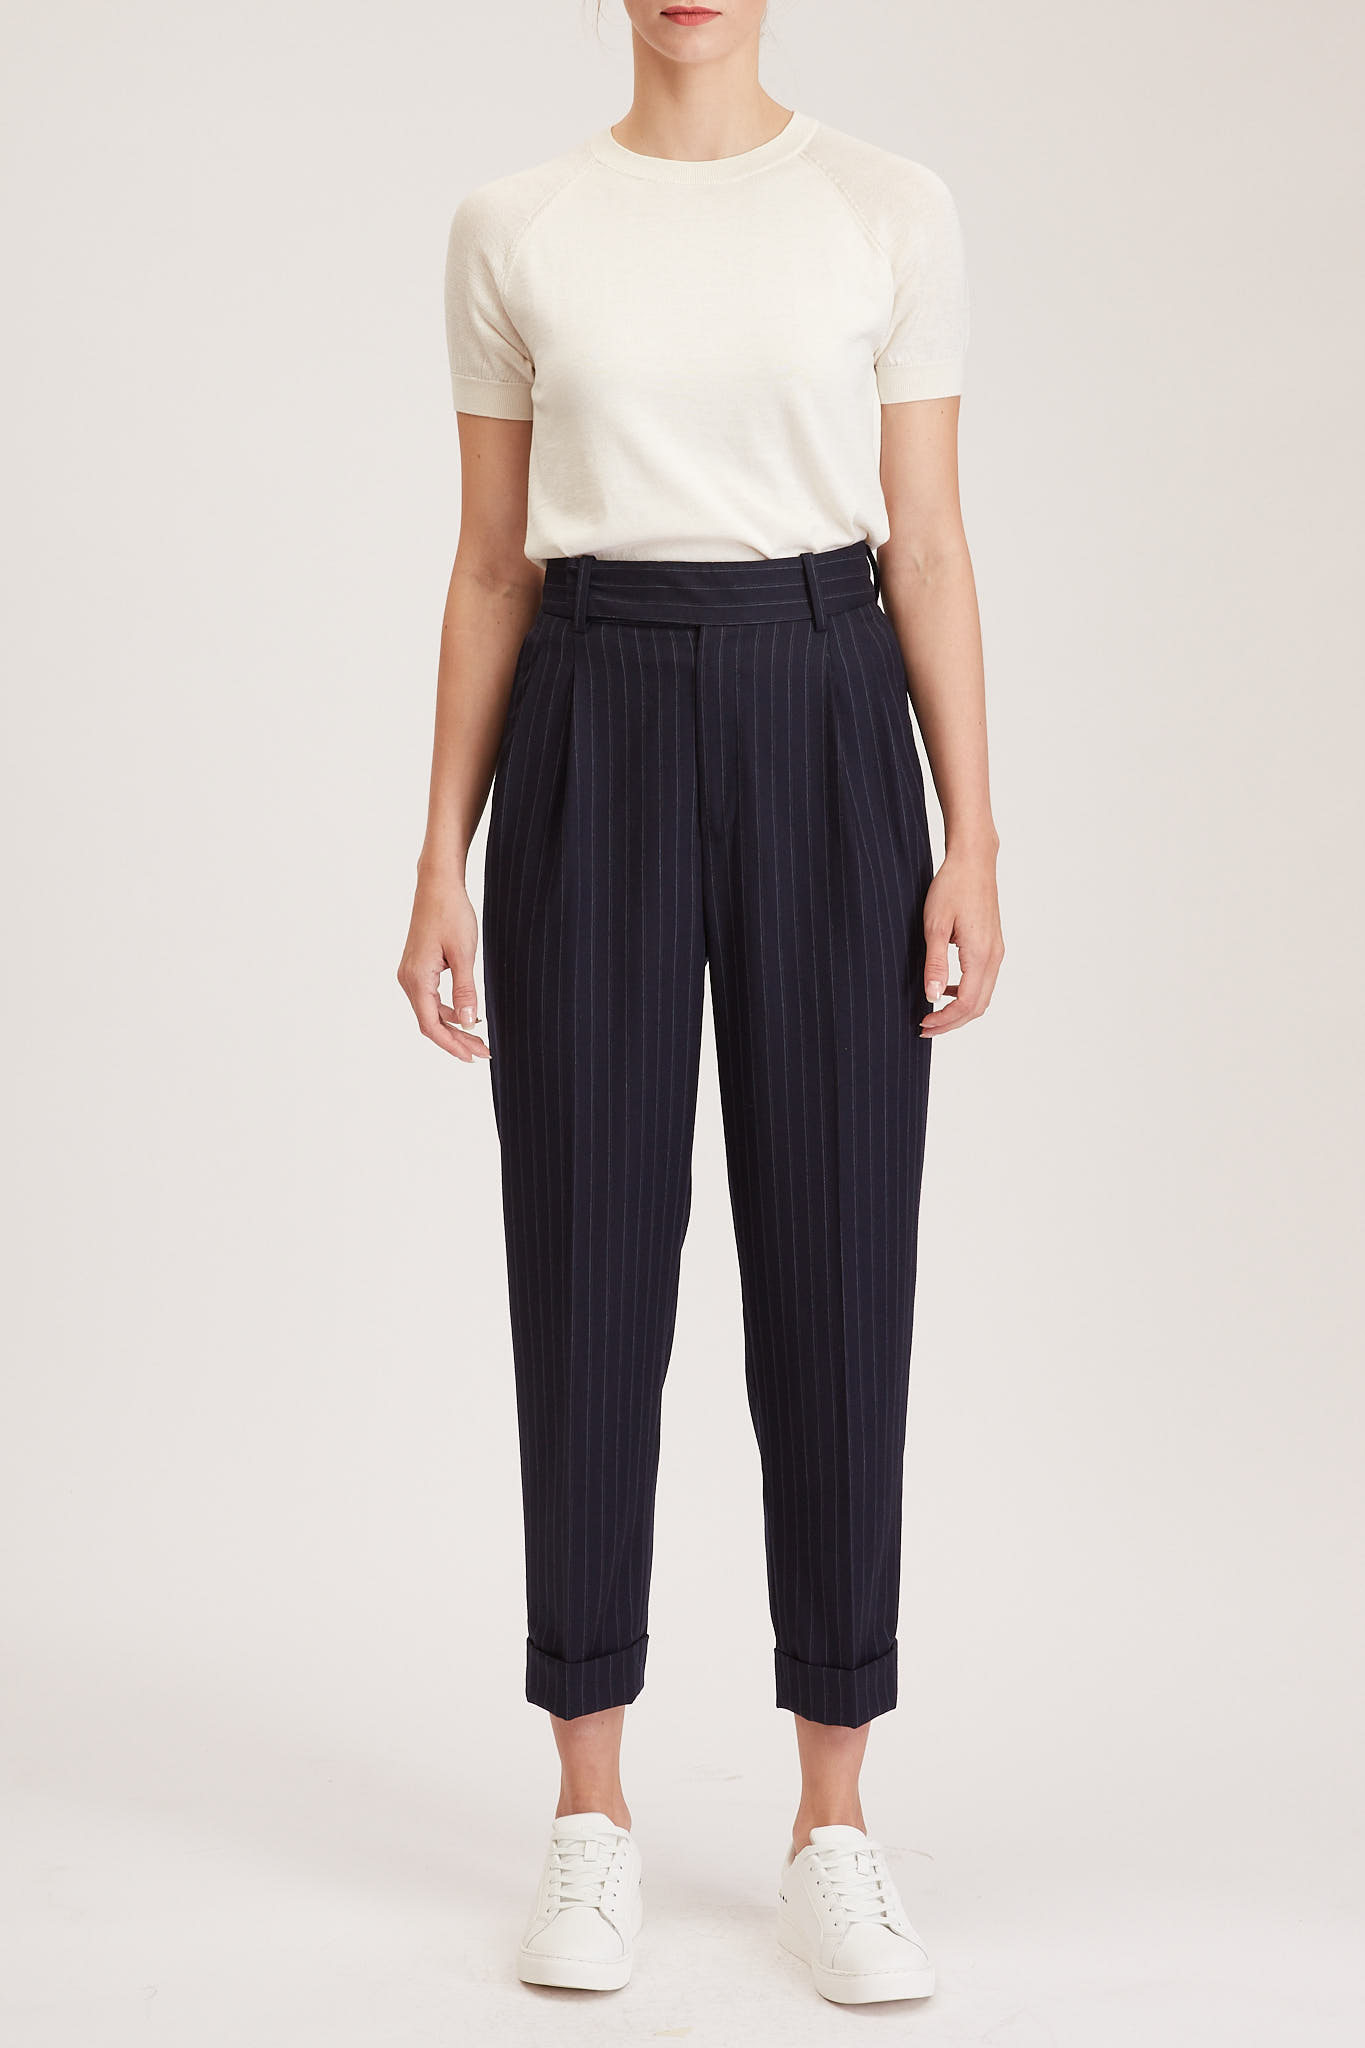 Southampton Trouser – High waisted, pleated trousers in navy pinstripe0